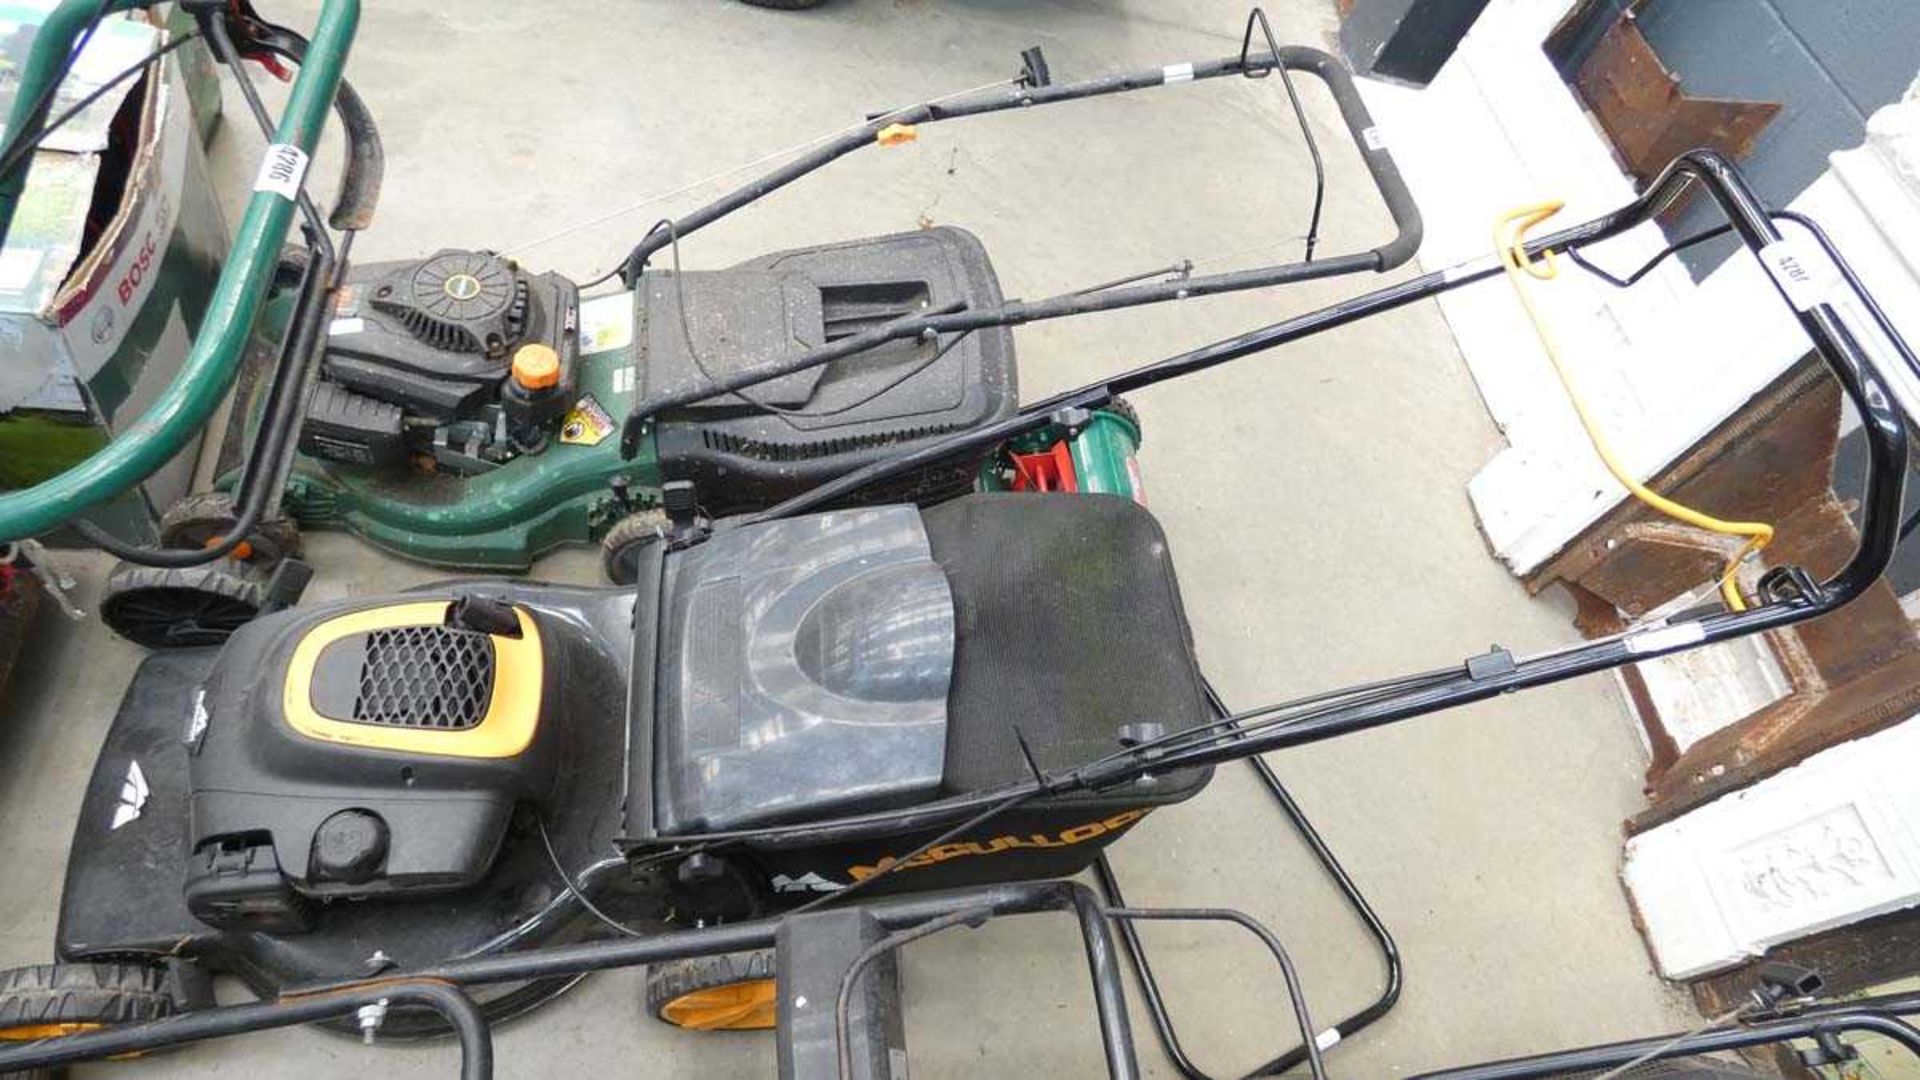 +VAT McCullough petrol powered rotary lawn mower with grass box